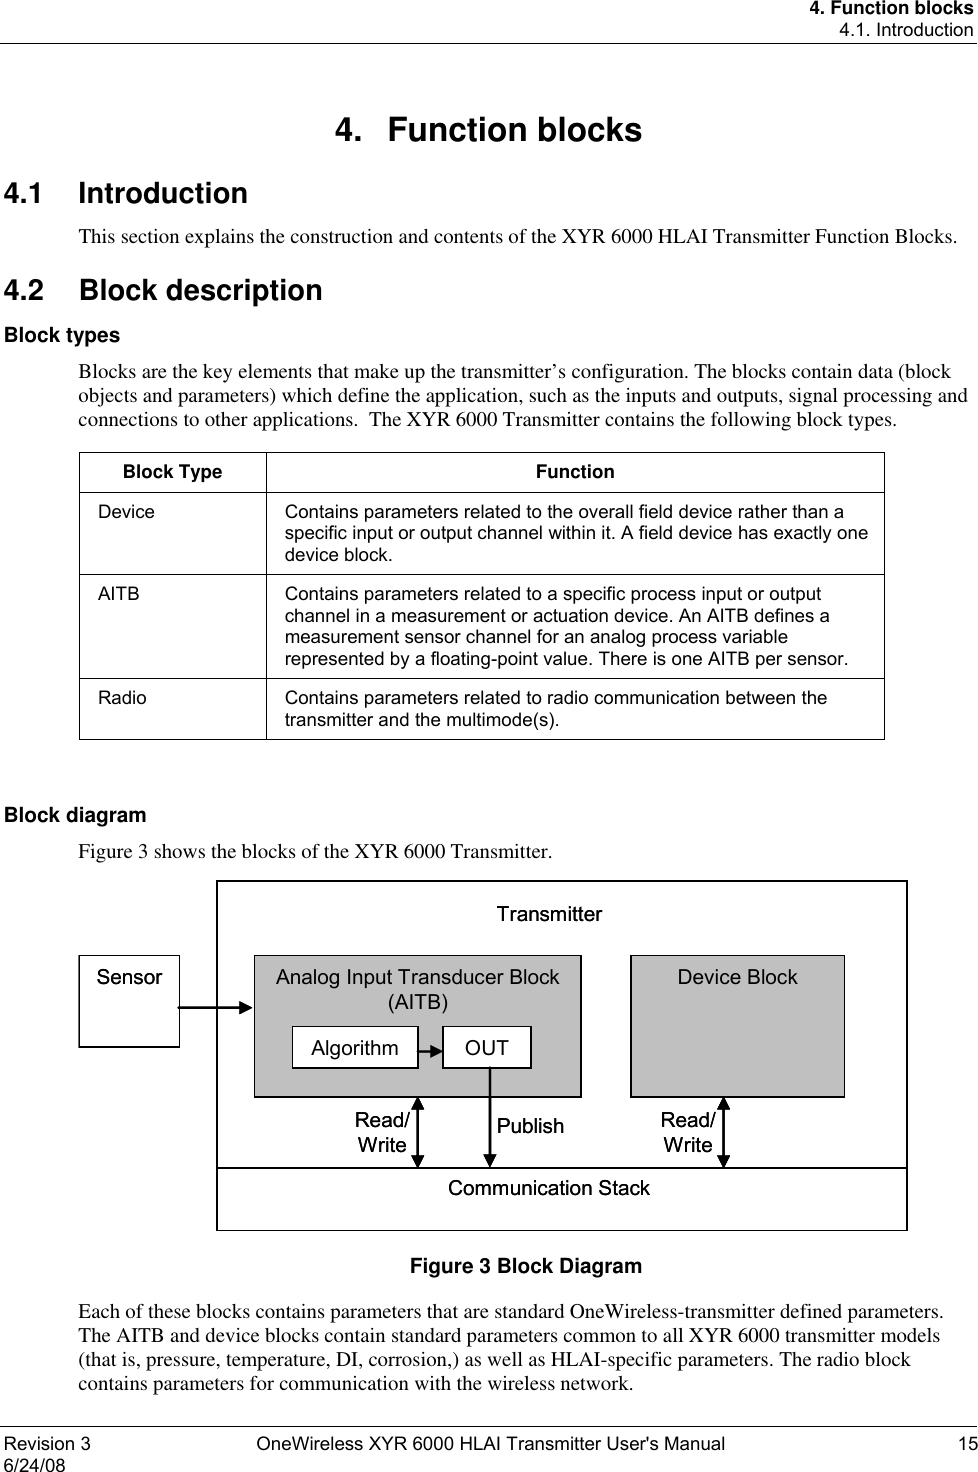 4. Function blocks 4.1. Introduction Revision 3  OneWireless XYR 6000 HLAI Transmitter User&apos;s Manual  15 6/24/08  4. Function blocks 4.1 Introduction This section explains the construction and contents of the XYR 6000 HLAI Transmitter Function Blocks. 4.2 Block description Block types Blocks are the key elements that make up the transmitter’s configuration. The blocks contain data (block objects and parameters) which define the application, such as the inputs and outputs, signal processing and connections to other applications.  The XYR 6000 Transmitter contains the following block types.  Block Type  Function Device  Contains parameters related to the overall field device rather than a specific input or output channel within it. A field device has exactly one device block. AITB  Contains parameters related to a specific process input or output channel in a measurement or actuation device. An AITB defines a measurement sensor channel for an analog process variable represented by a floating-point value. There is one AITB per sensor.   Radio  Contains parameters related to radio communication between the transmitter and the multimode(s).   Block diagram Figure 3 shows the blocks of the XYR 6000 Transmitter. Sensor Analog Input Transducer Block (AITB)TransmitterDevice BlockCommunication StackAlgorithm OUTRead/Write Publish Read/WriteSensor Analog Input Transducer Block (AITB)TransmitterDevice BlockCommunication StackAlgorithm OUTRead/Write Publish Read/Write Figure 3 Block Diagram Each of these blocks contains parameters that are standard OneWireless-transmitter defined parameters. The AITB and device blocks contain standard parameters common to all XYR 6000 transmitter models (that is, pressure, temperature, DI, corrosion,) as well as HLAI-specific parameters. The radio block contains parameters for communication with the wireless network.  